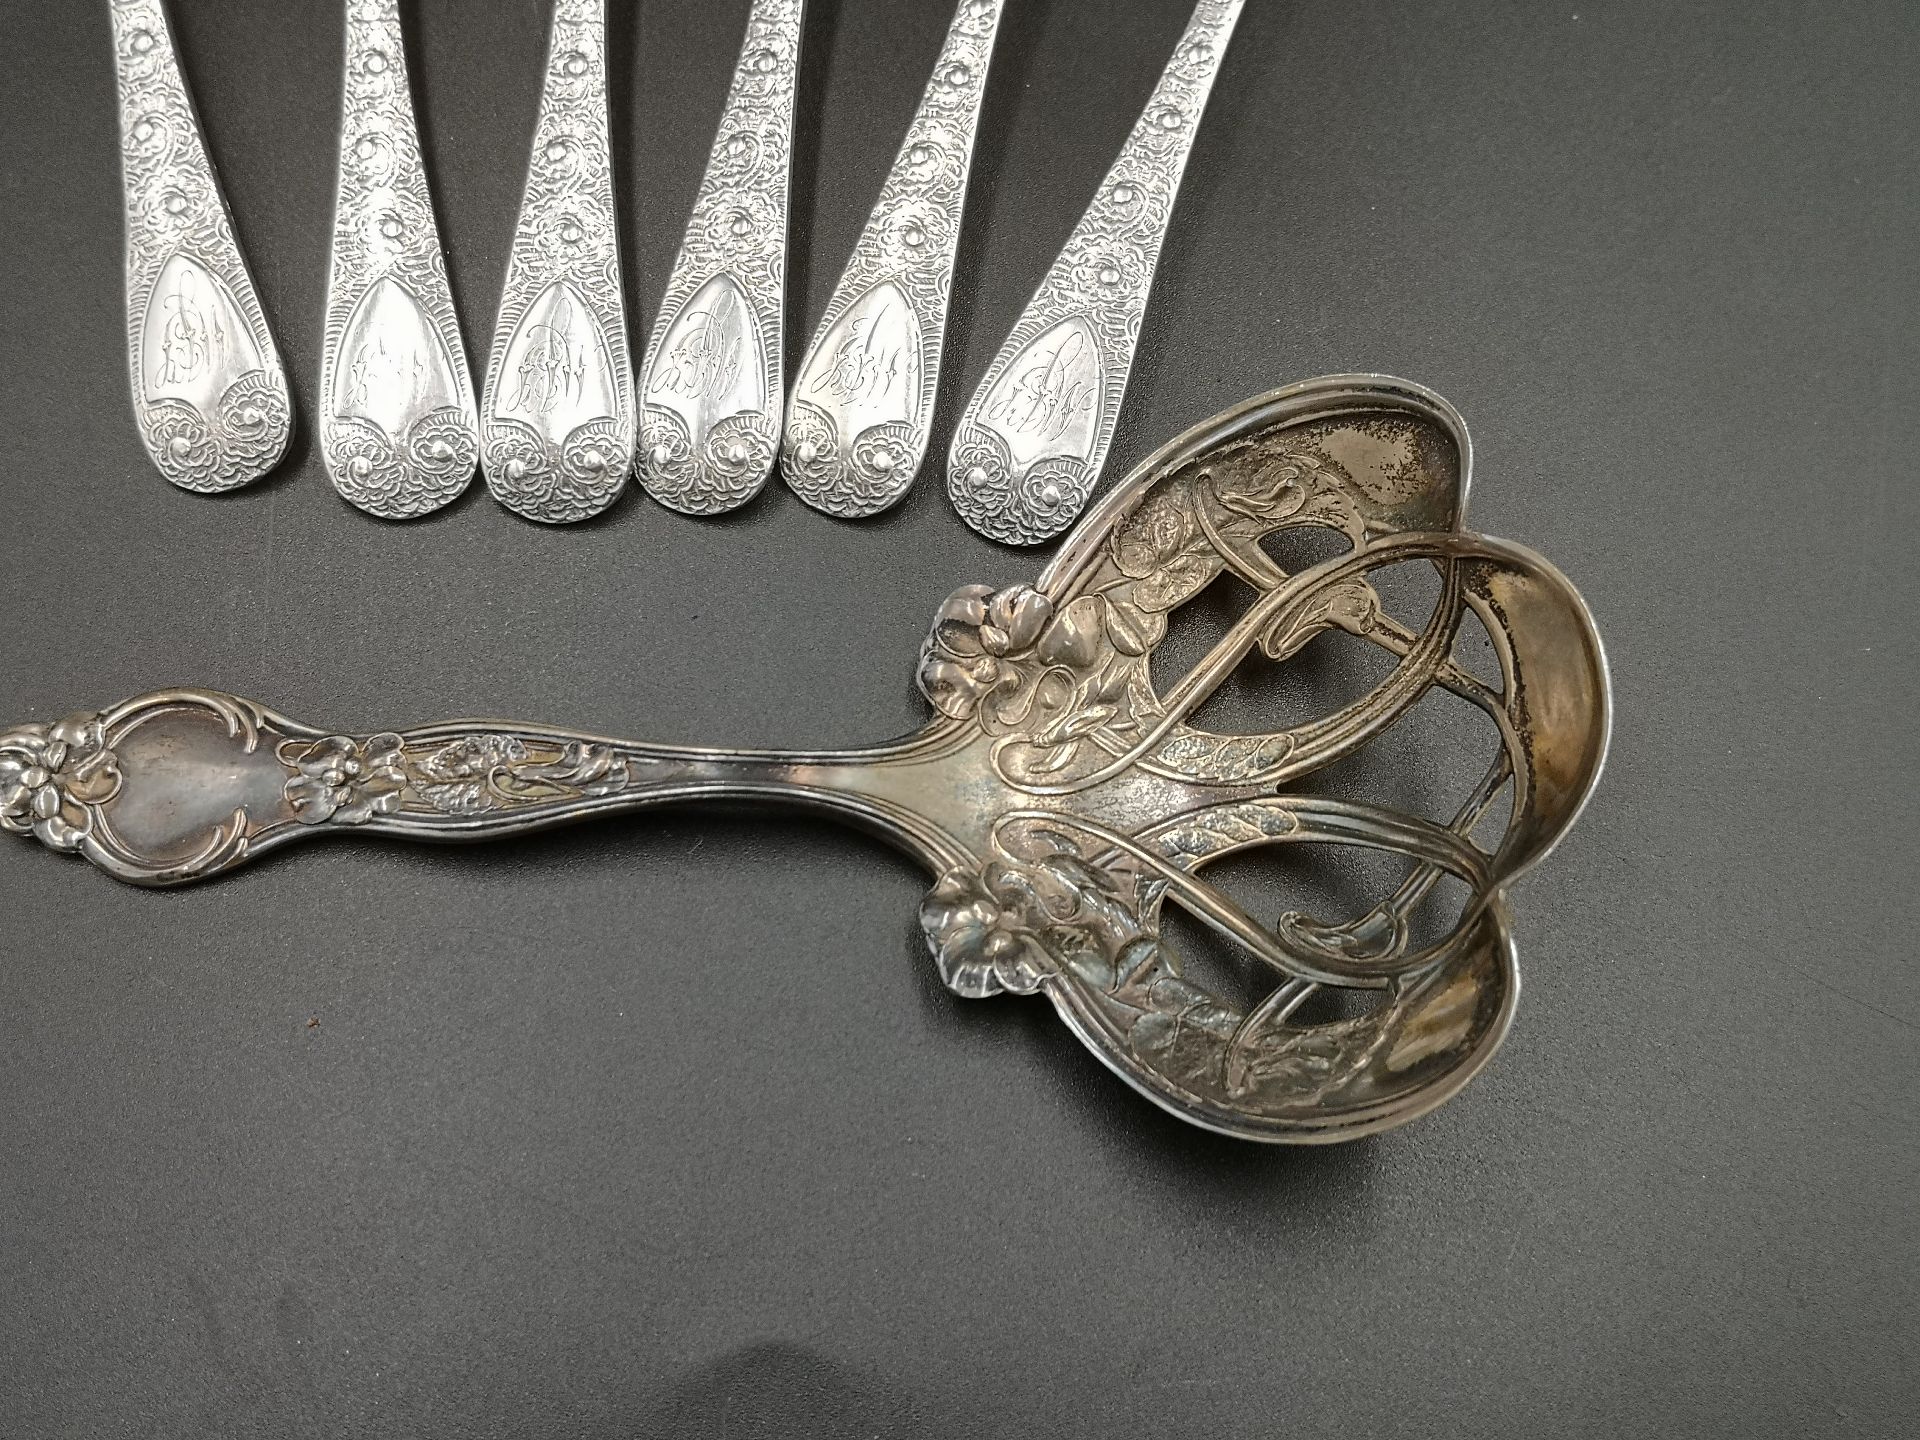 Ten Victorian silver spoons together with other silver spoons - Image 2 of 6